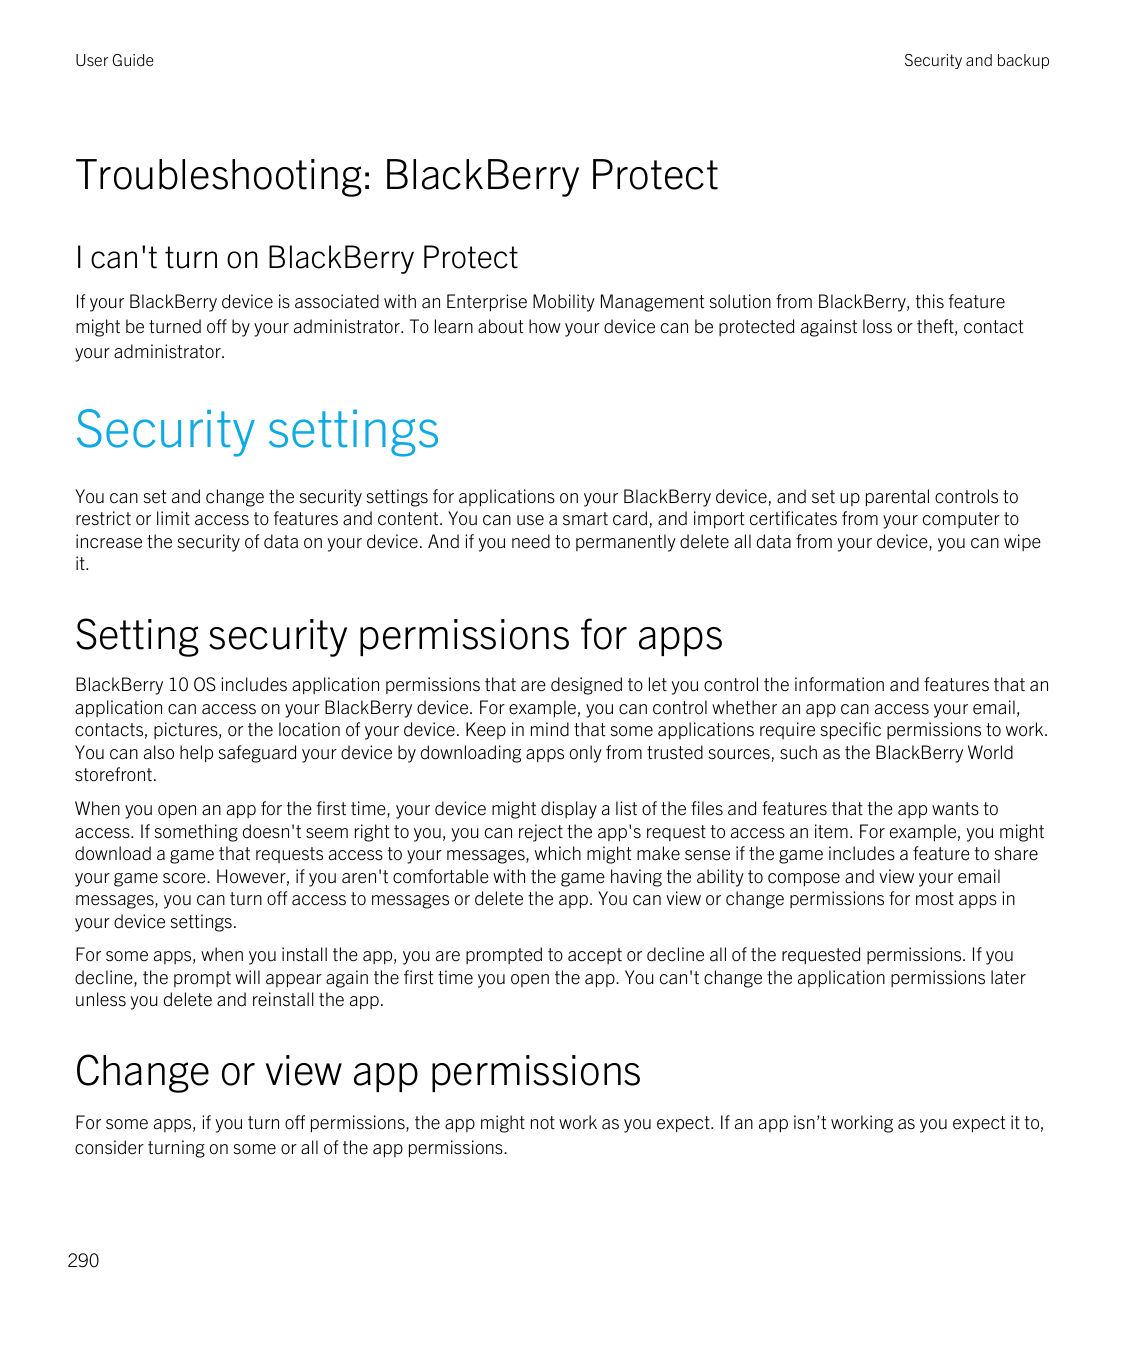 User GuideSecurity and backupTroubleshooting: BlackBerry ProtectI can't turn on BlackBerry ProtectIf your BlackBerry device is a